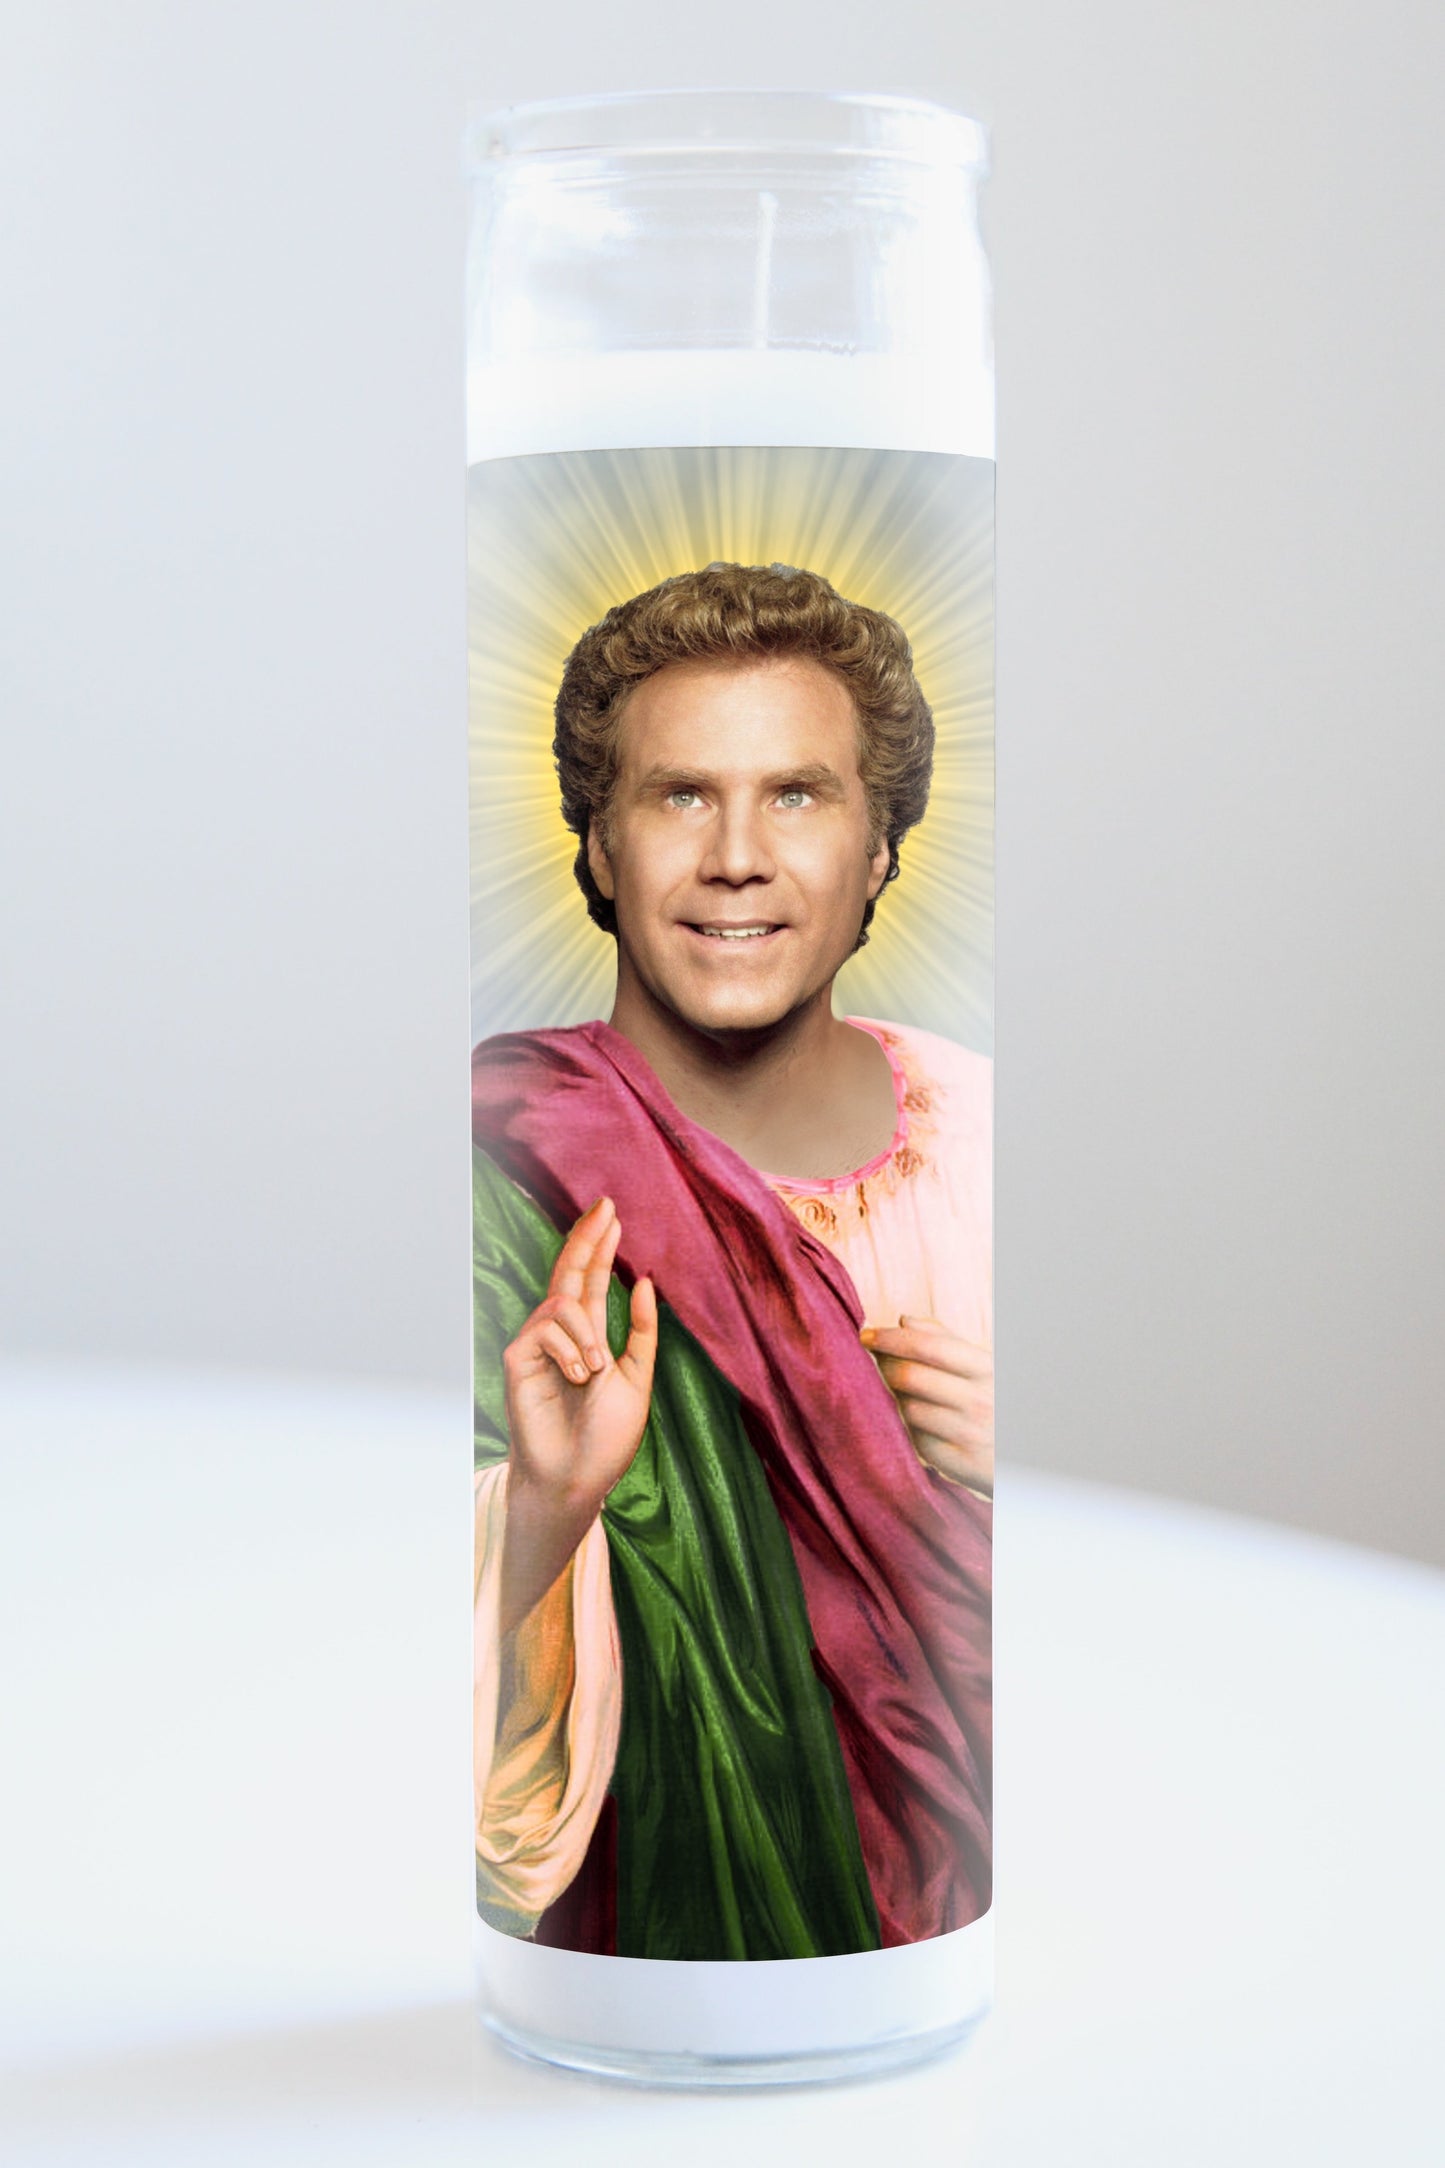 Will Ferrell (Step Brothers)